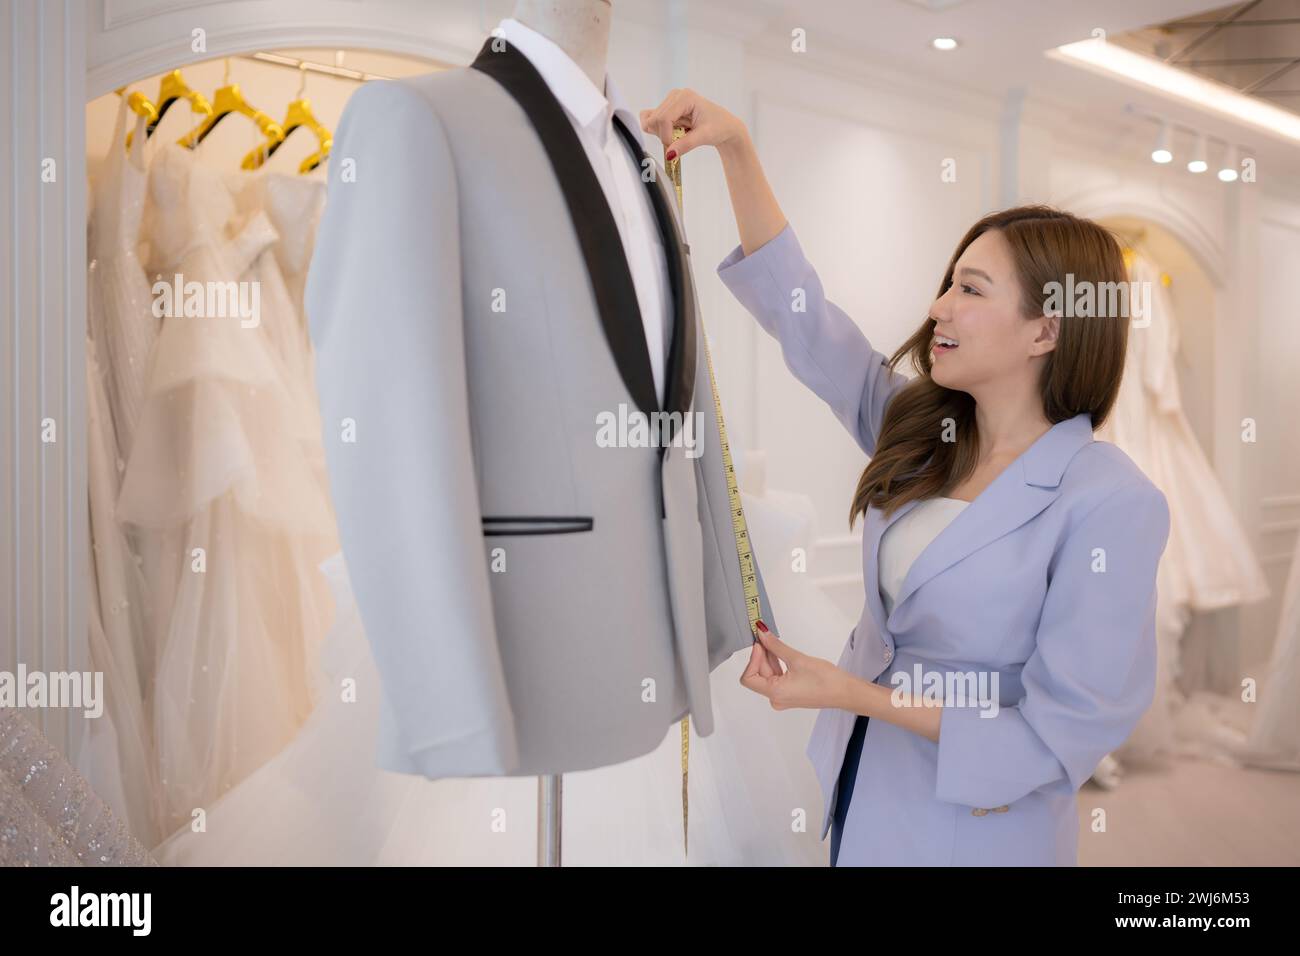 Asian fashion designers make sure the groom's outfit is absolutely accurate and ready for the bride and groom to try on. Stock Photo